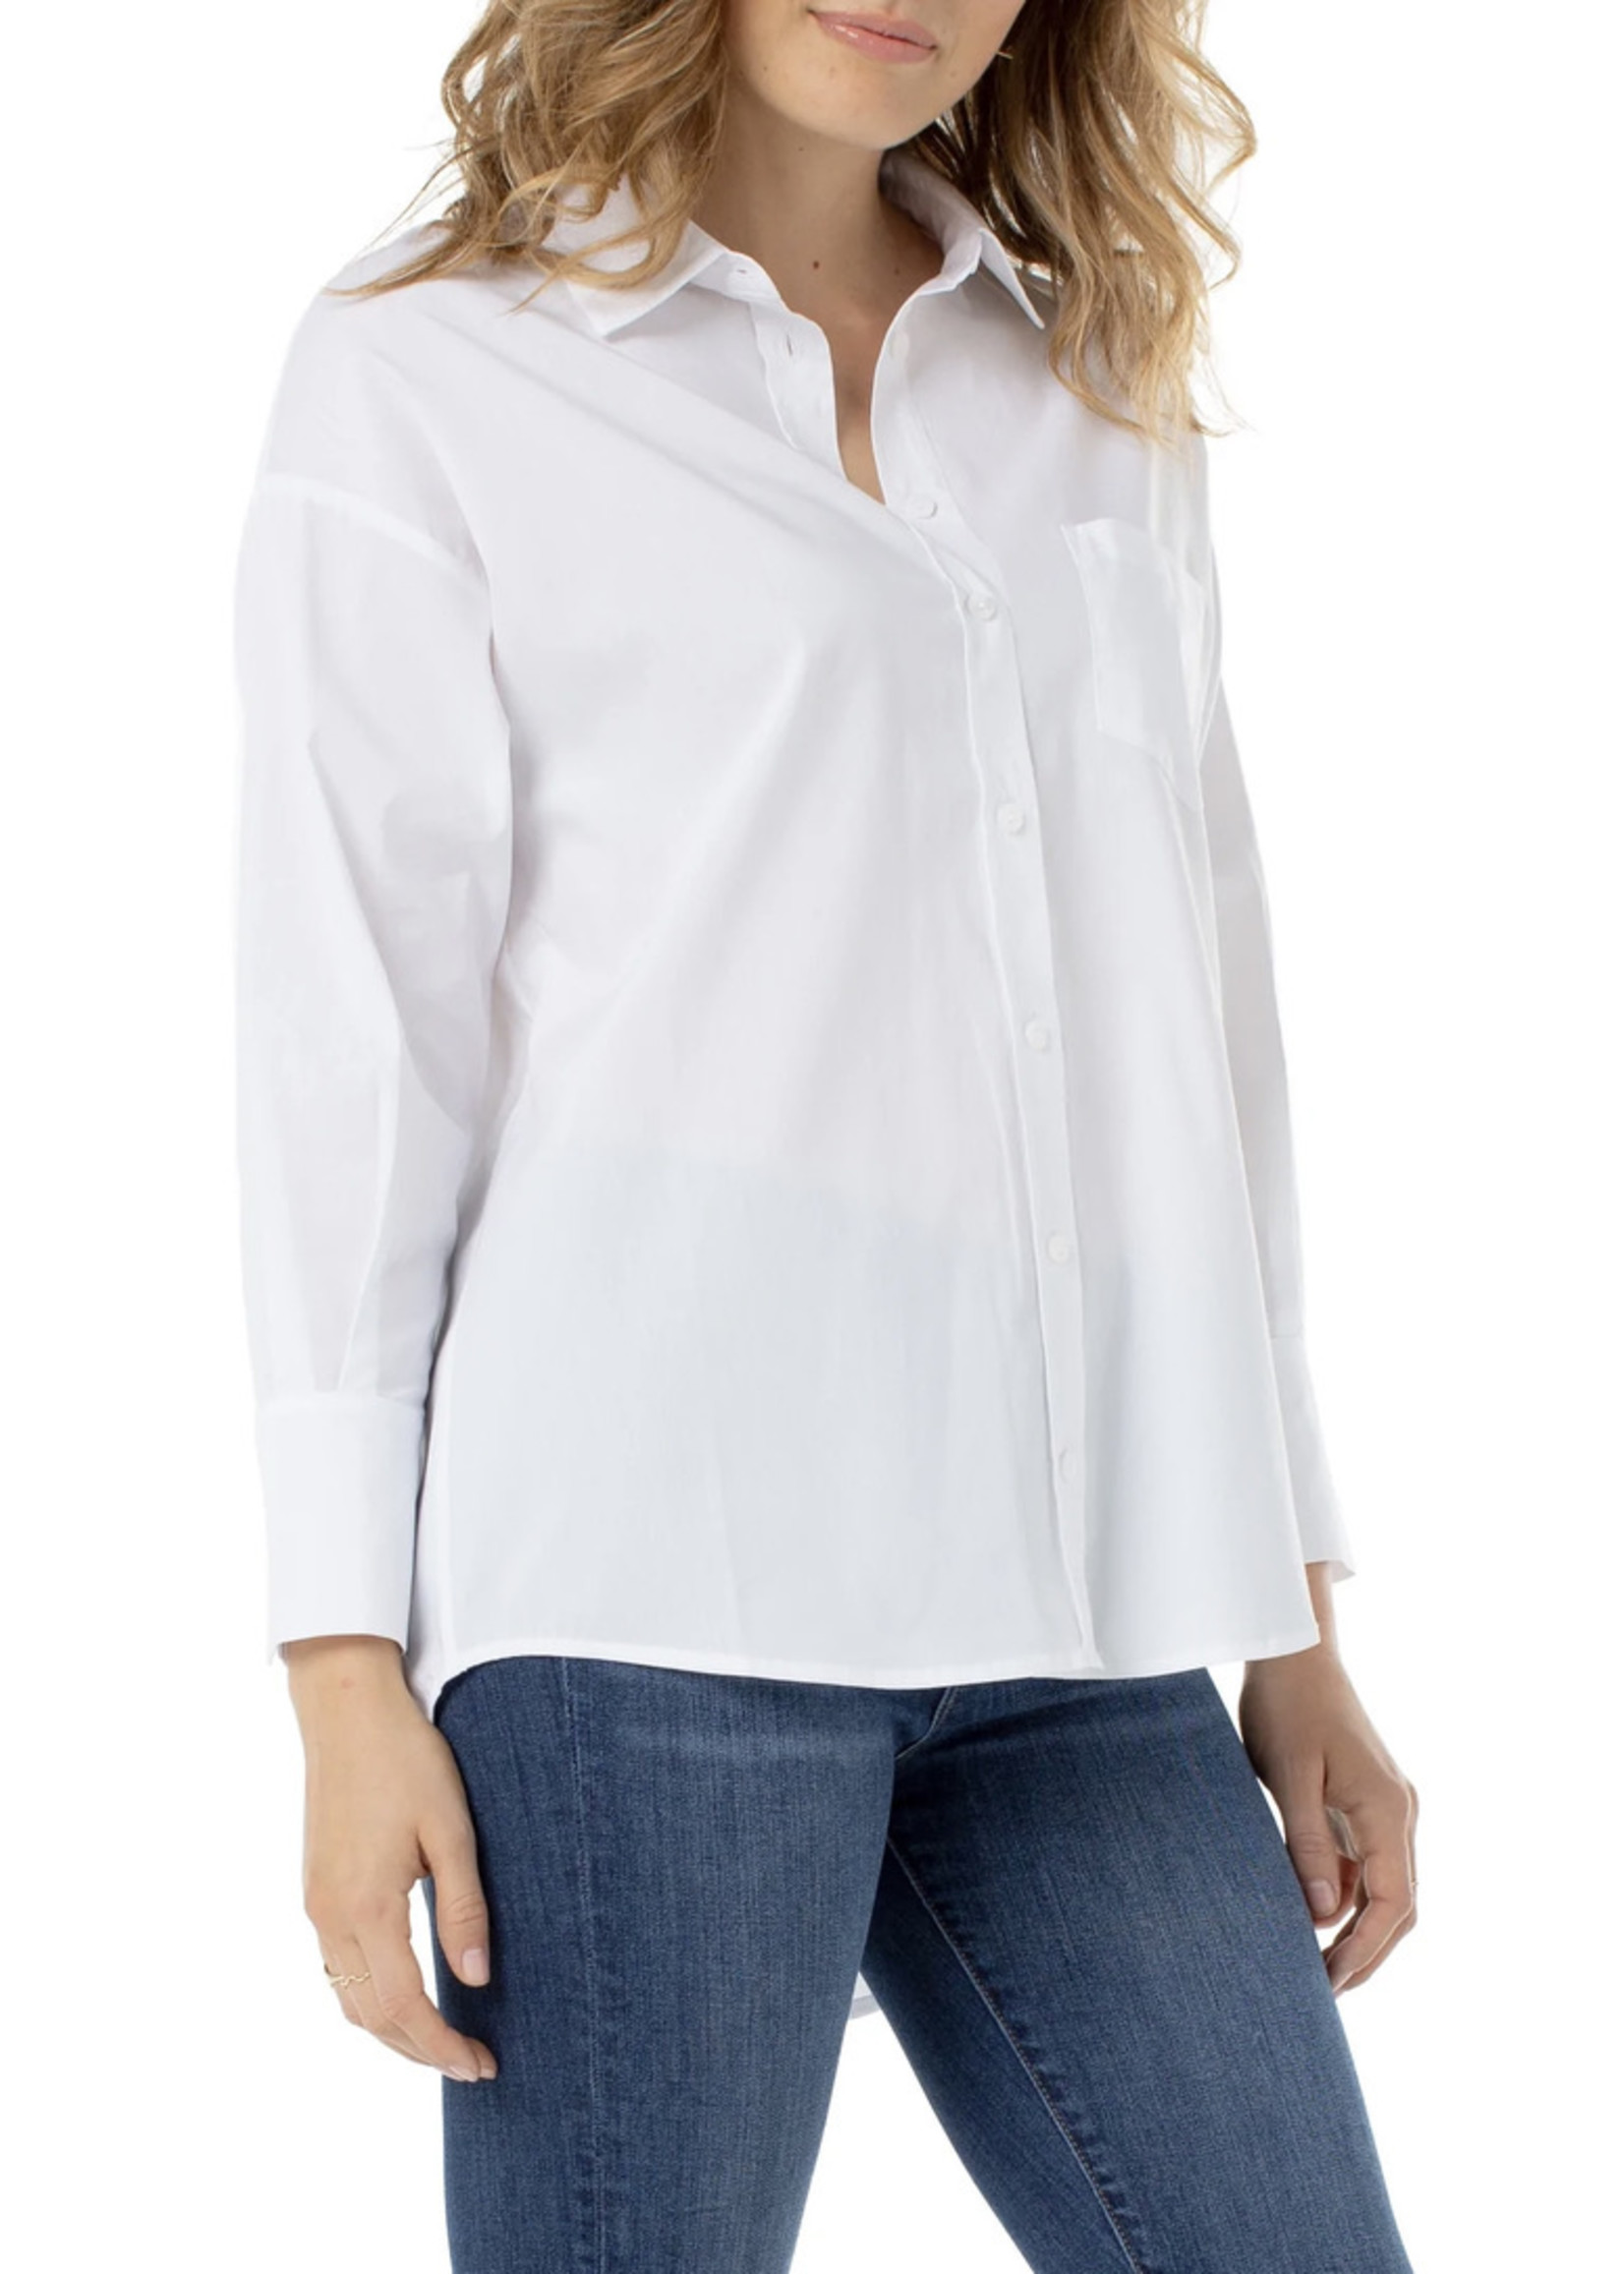 Liverpool Jeans Classic White Blouse